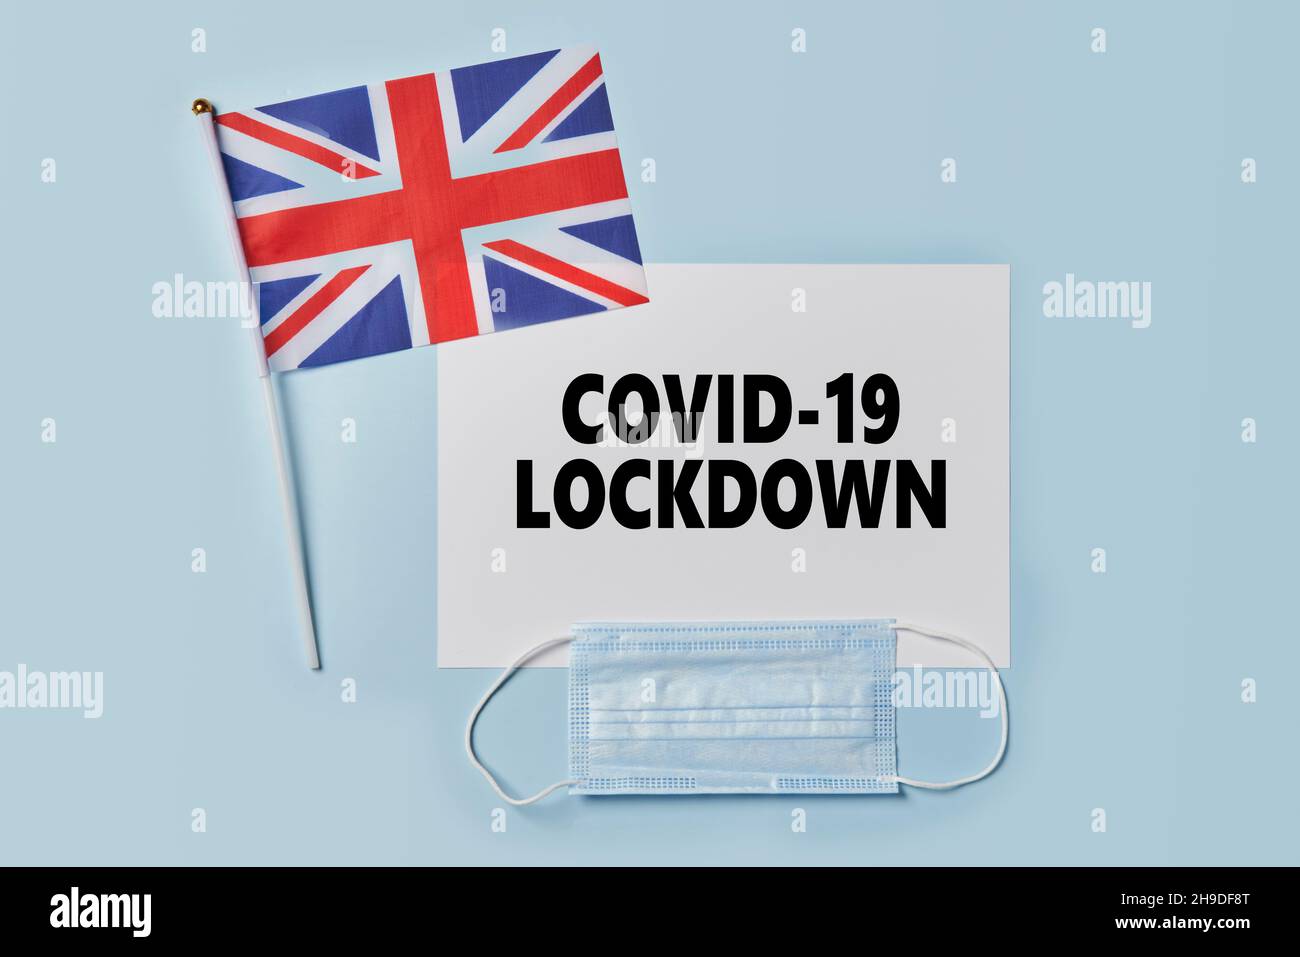 Coronavirus new wave text on paper, UK national flag and face mask. Lockdown, quarantine due to new Covid-19 variant Stock Photo